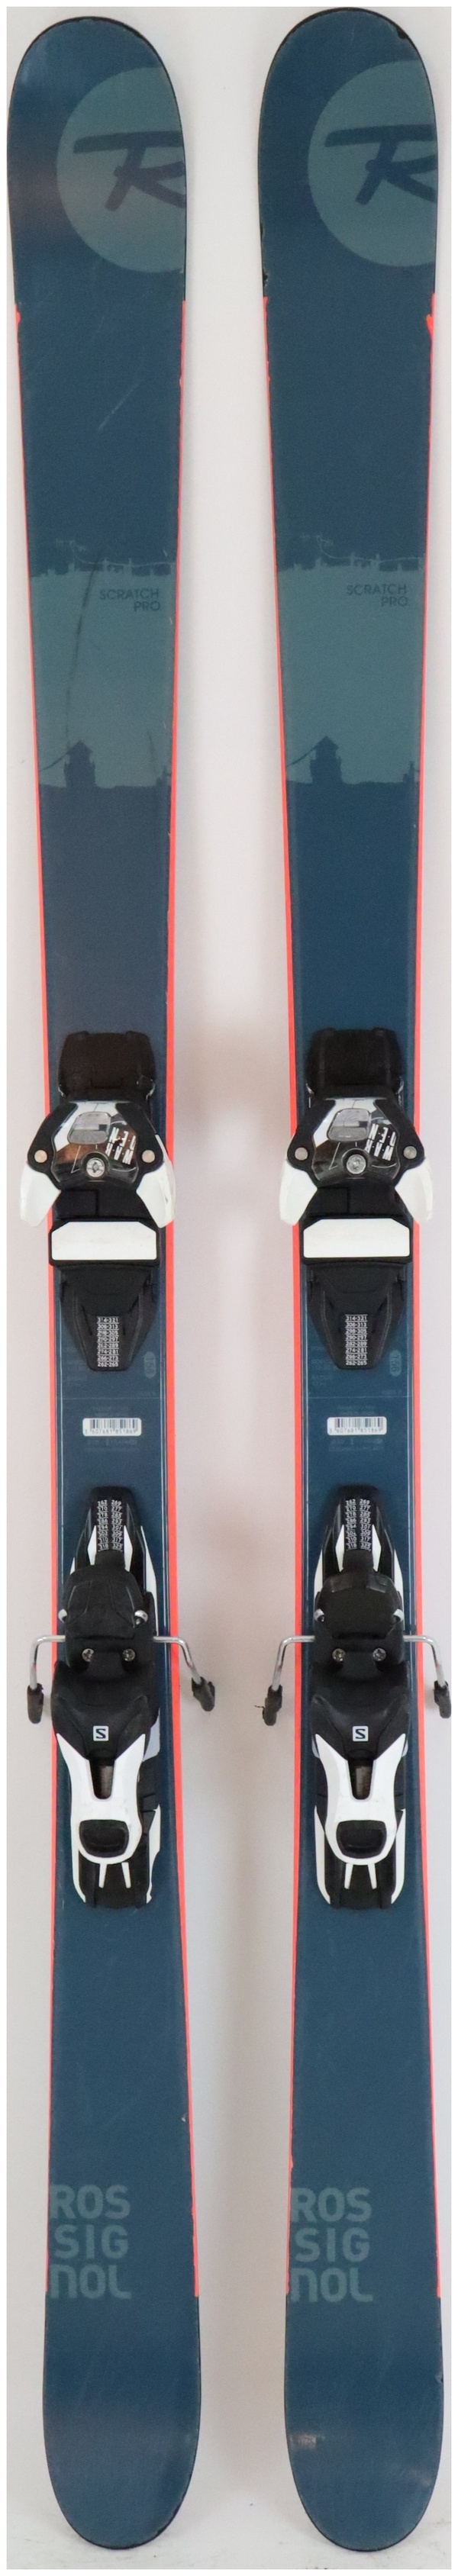 2017, Rossignol, Scratch Pro Skis with Salomon Warden 11 Demo Bindings Used  Demo Skis 158cm